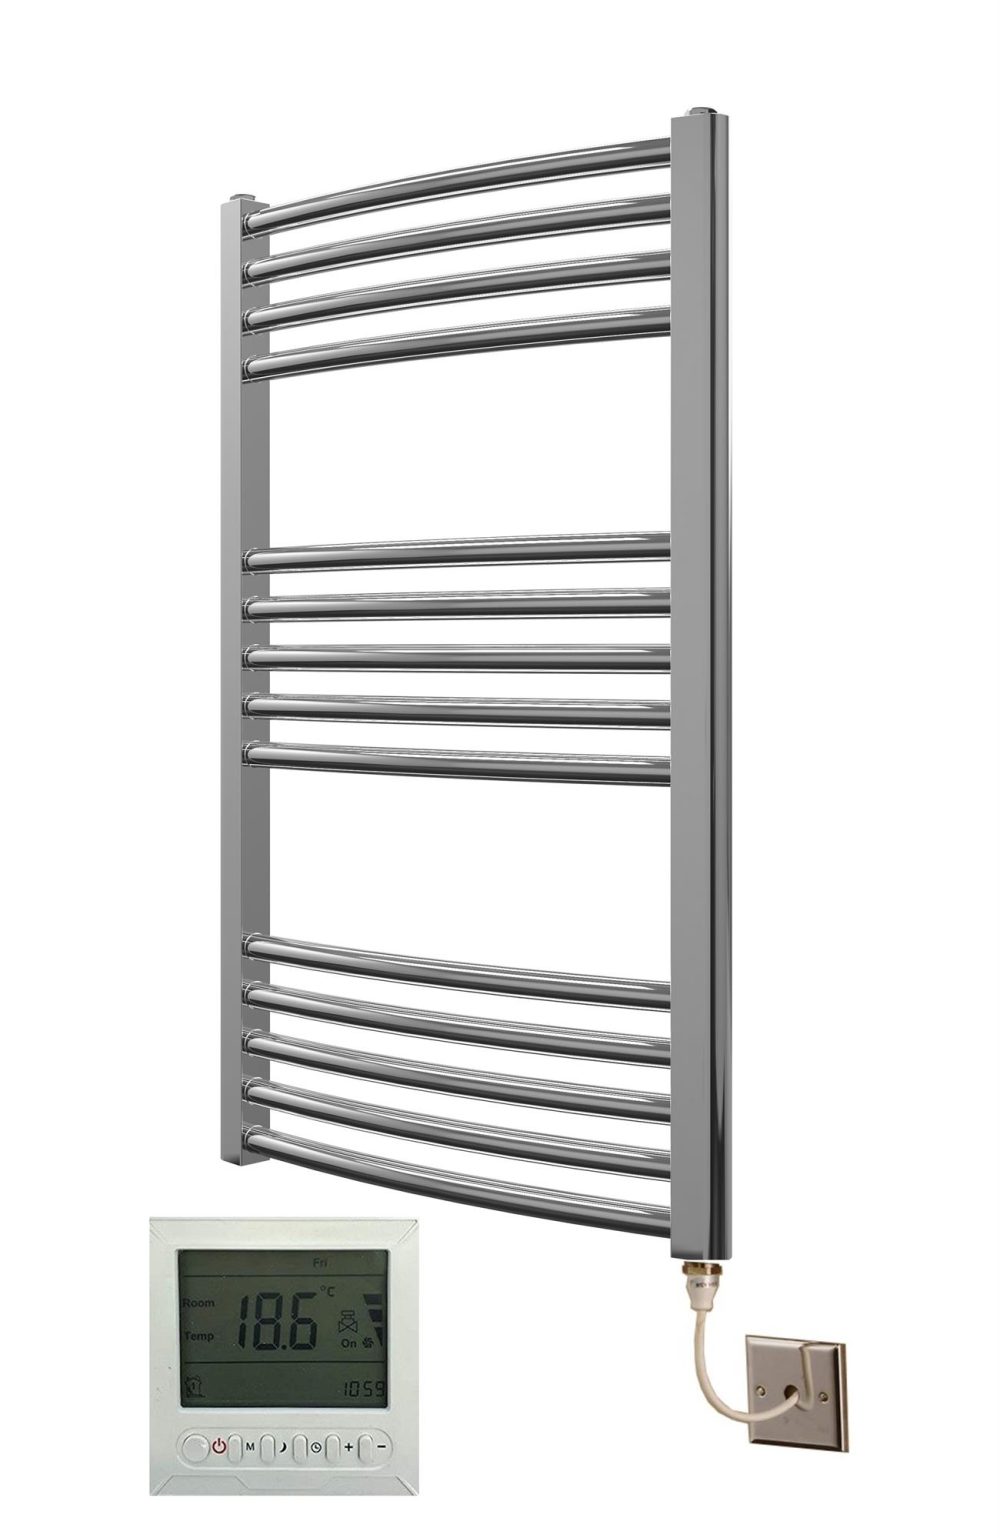 Chrome electric towel rails with thermostat/timer